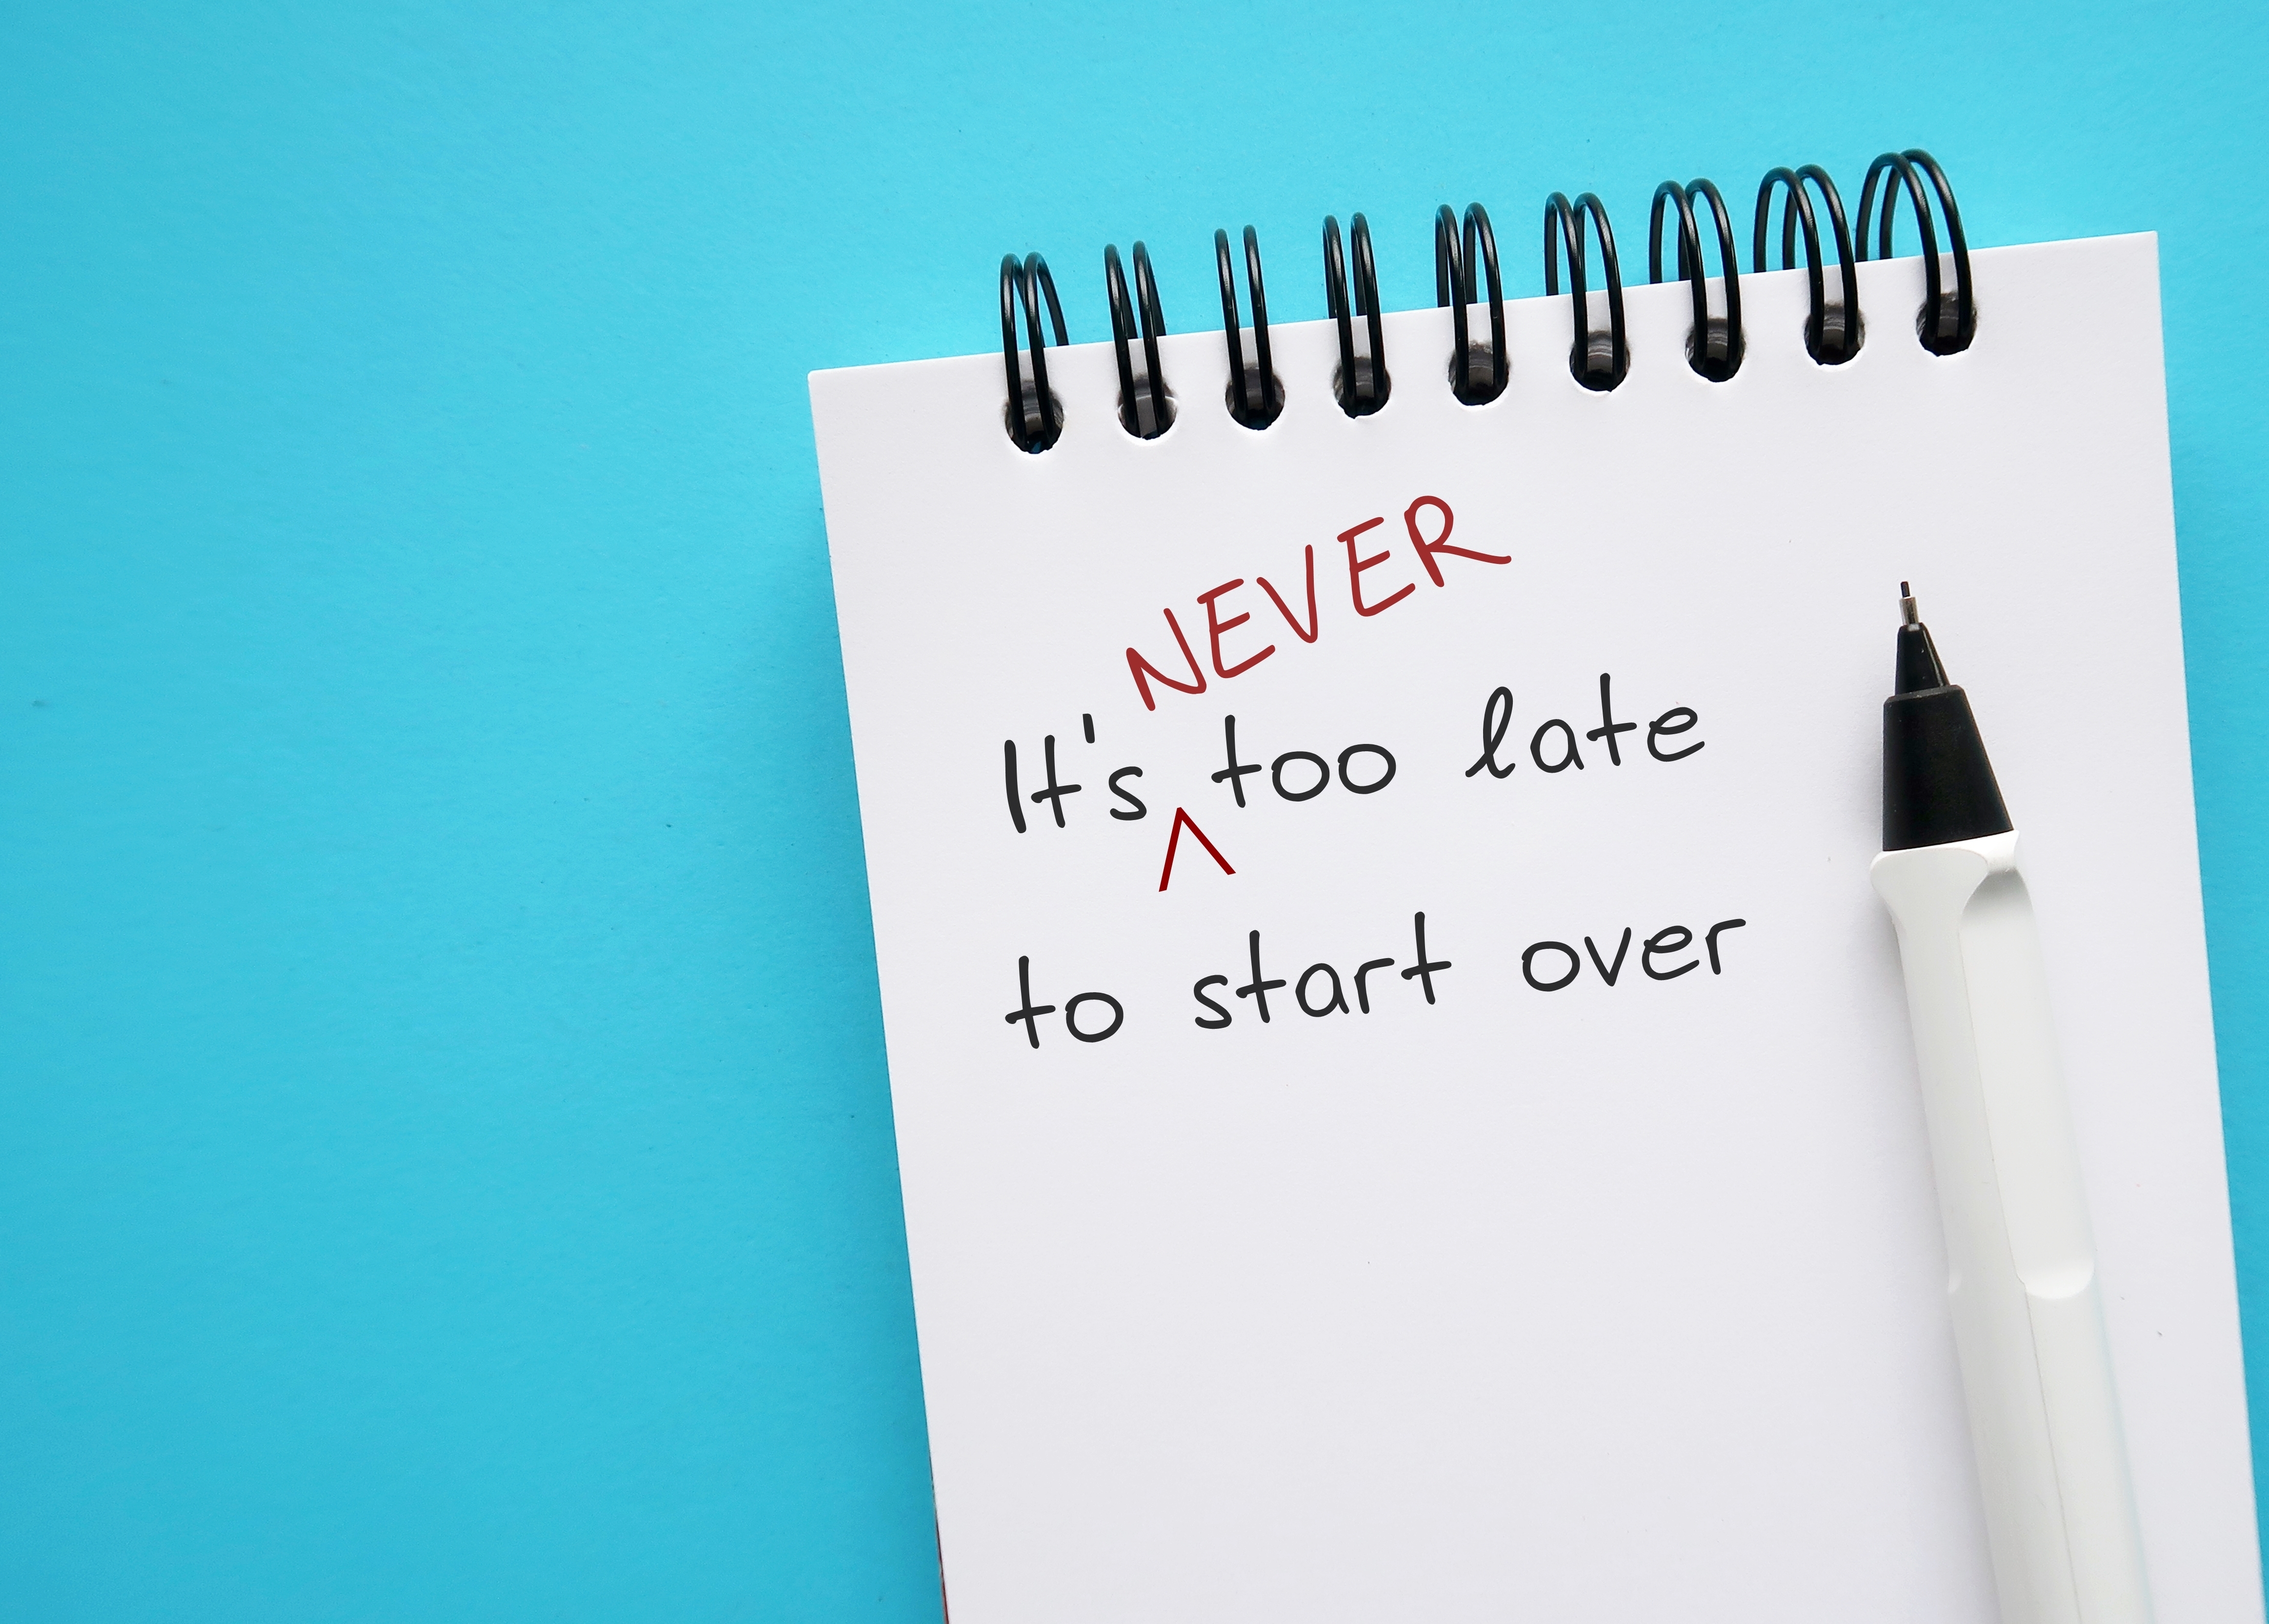 A notebook with the words "It's never too late to start over" scribbled on a page | Source: Shutterstock